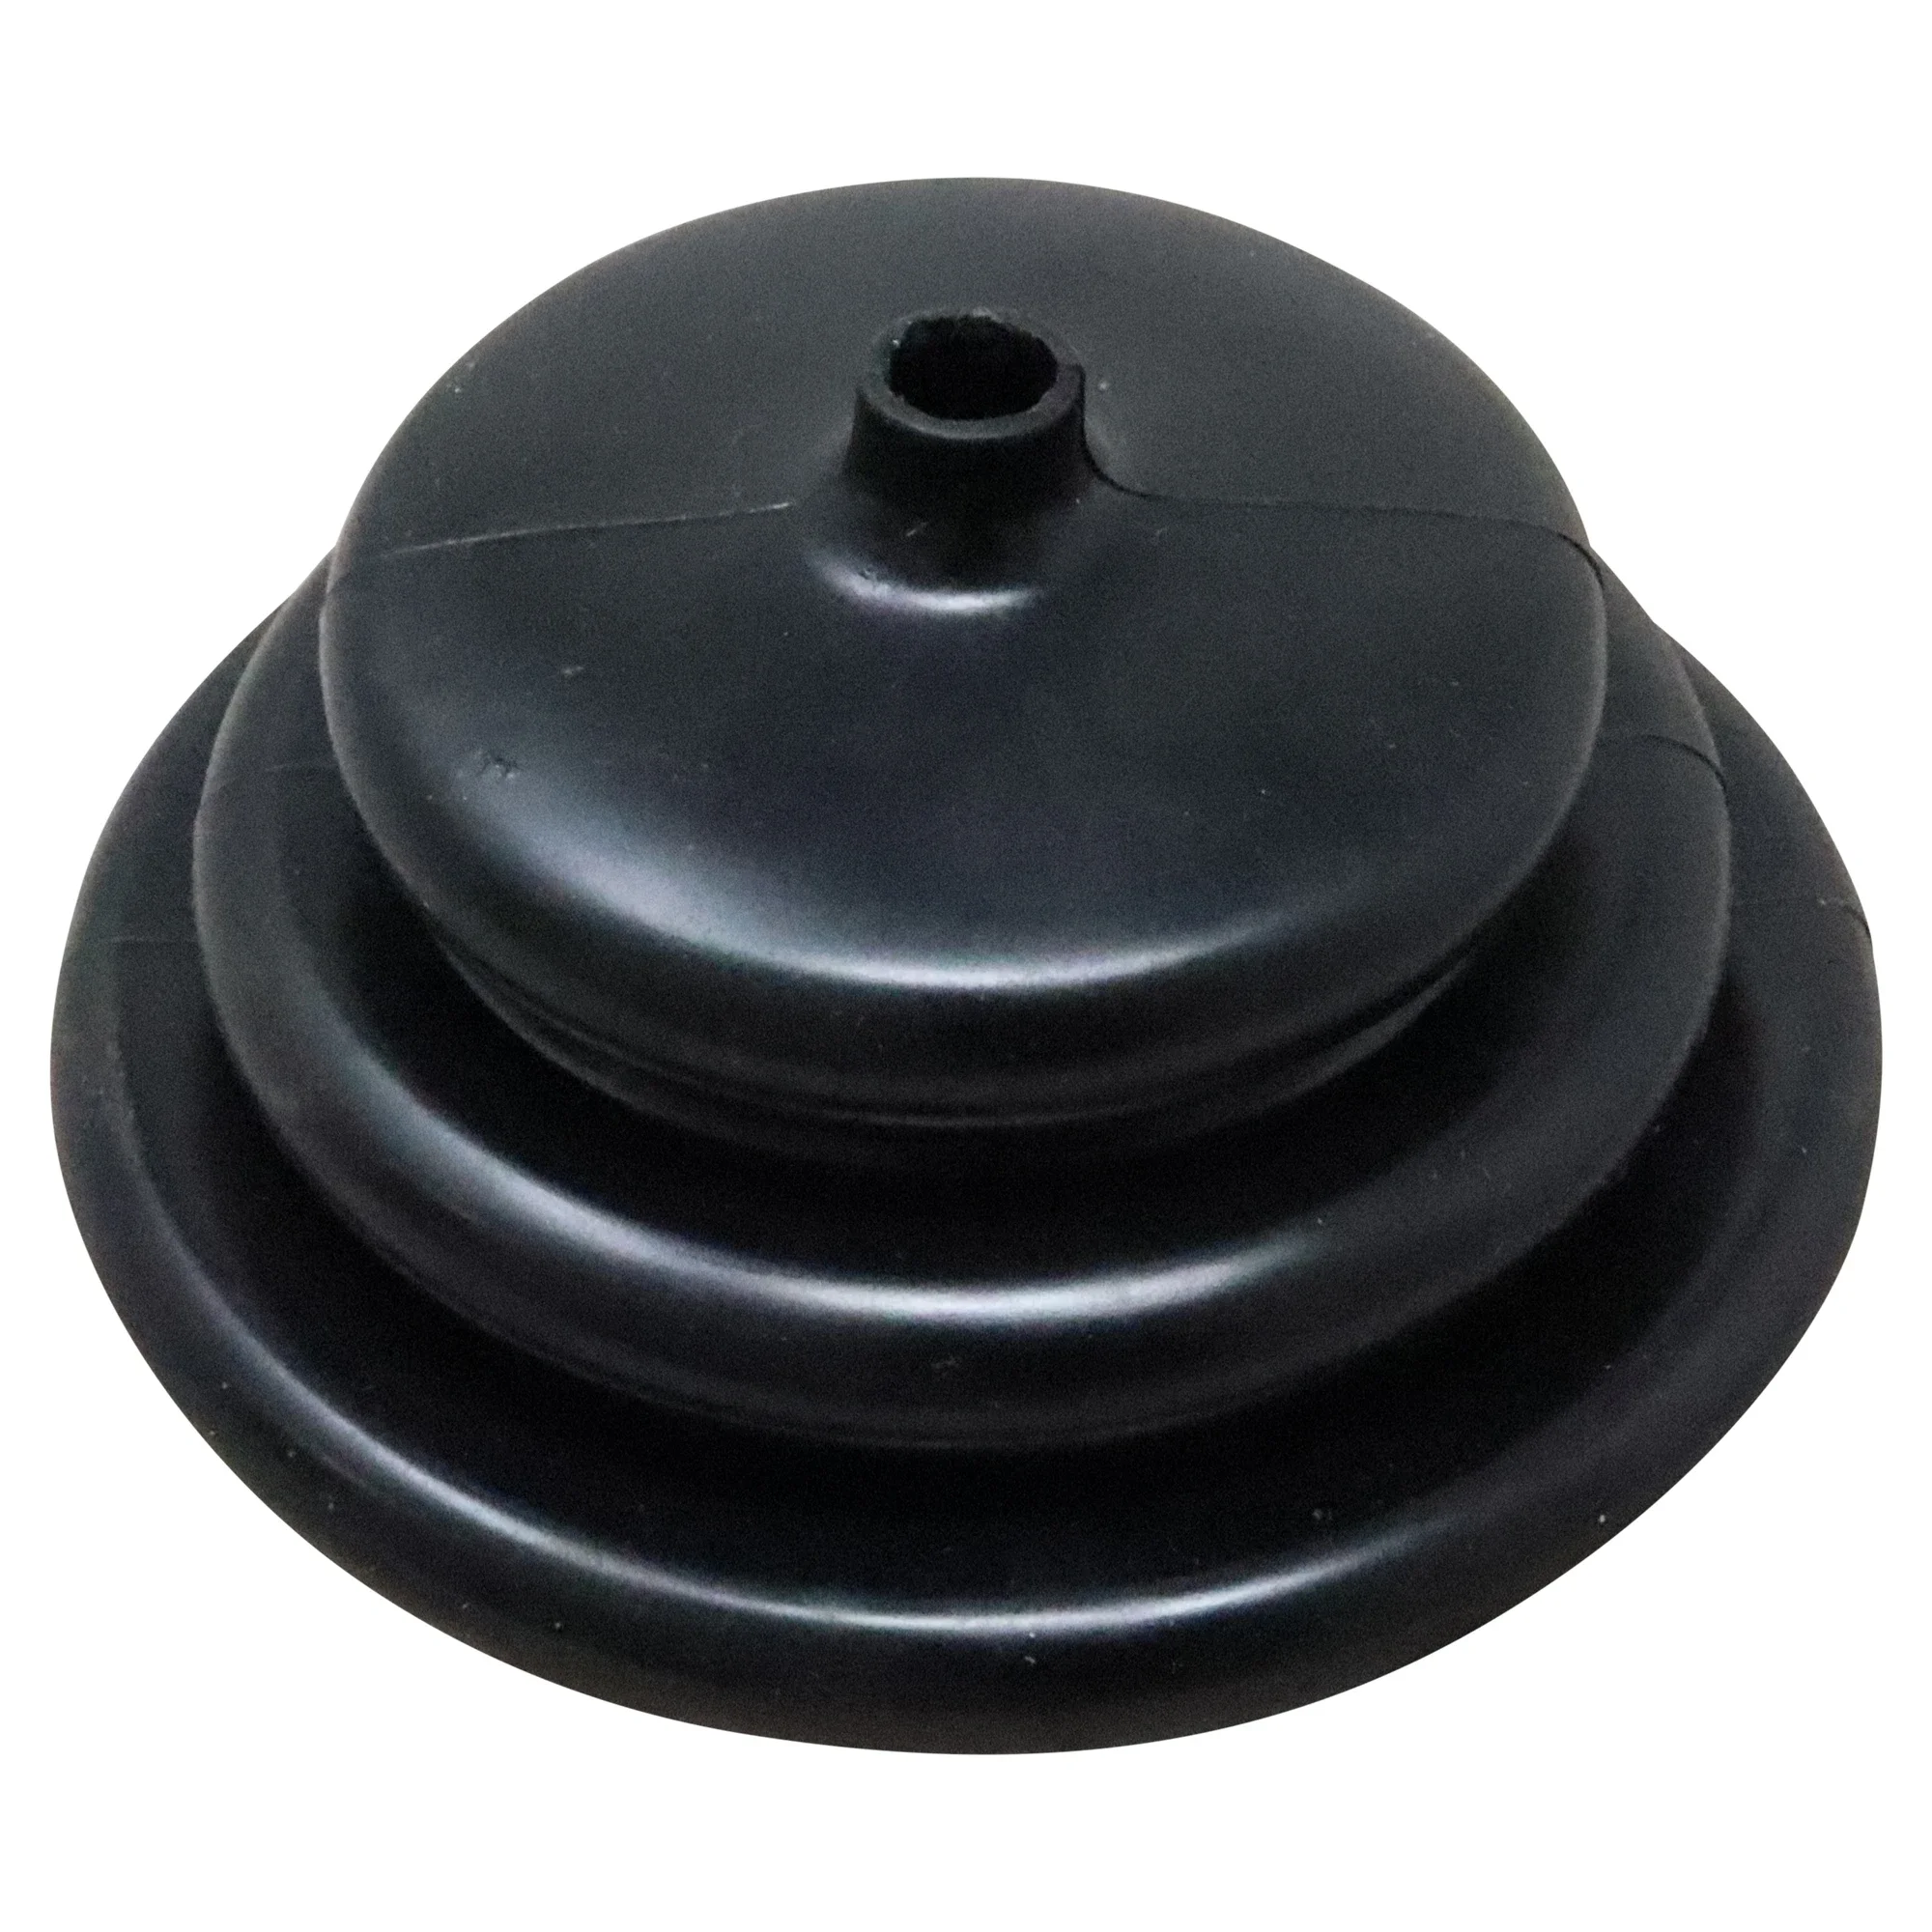 Wastebuilt® Replacement for Heil Boot-Joystick